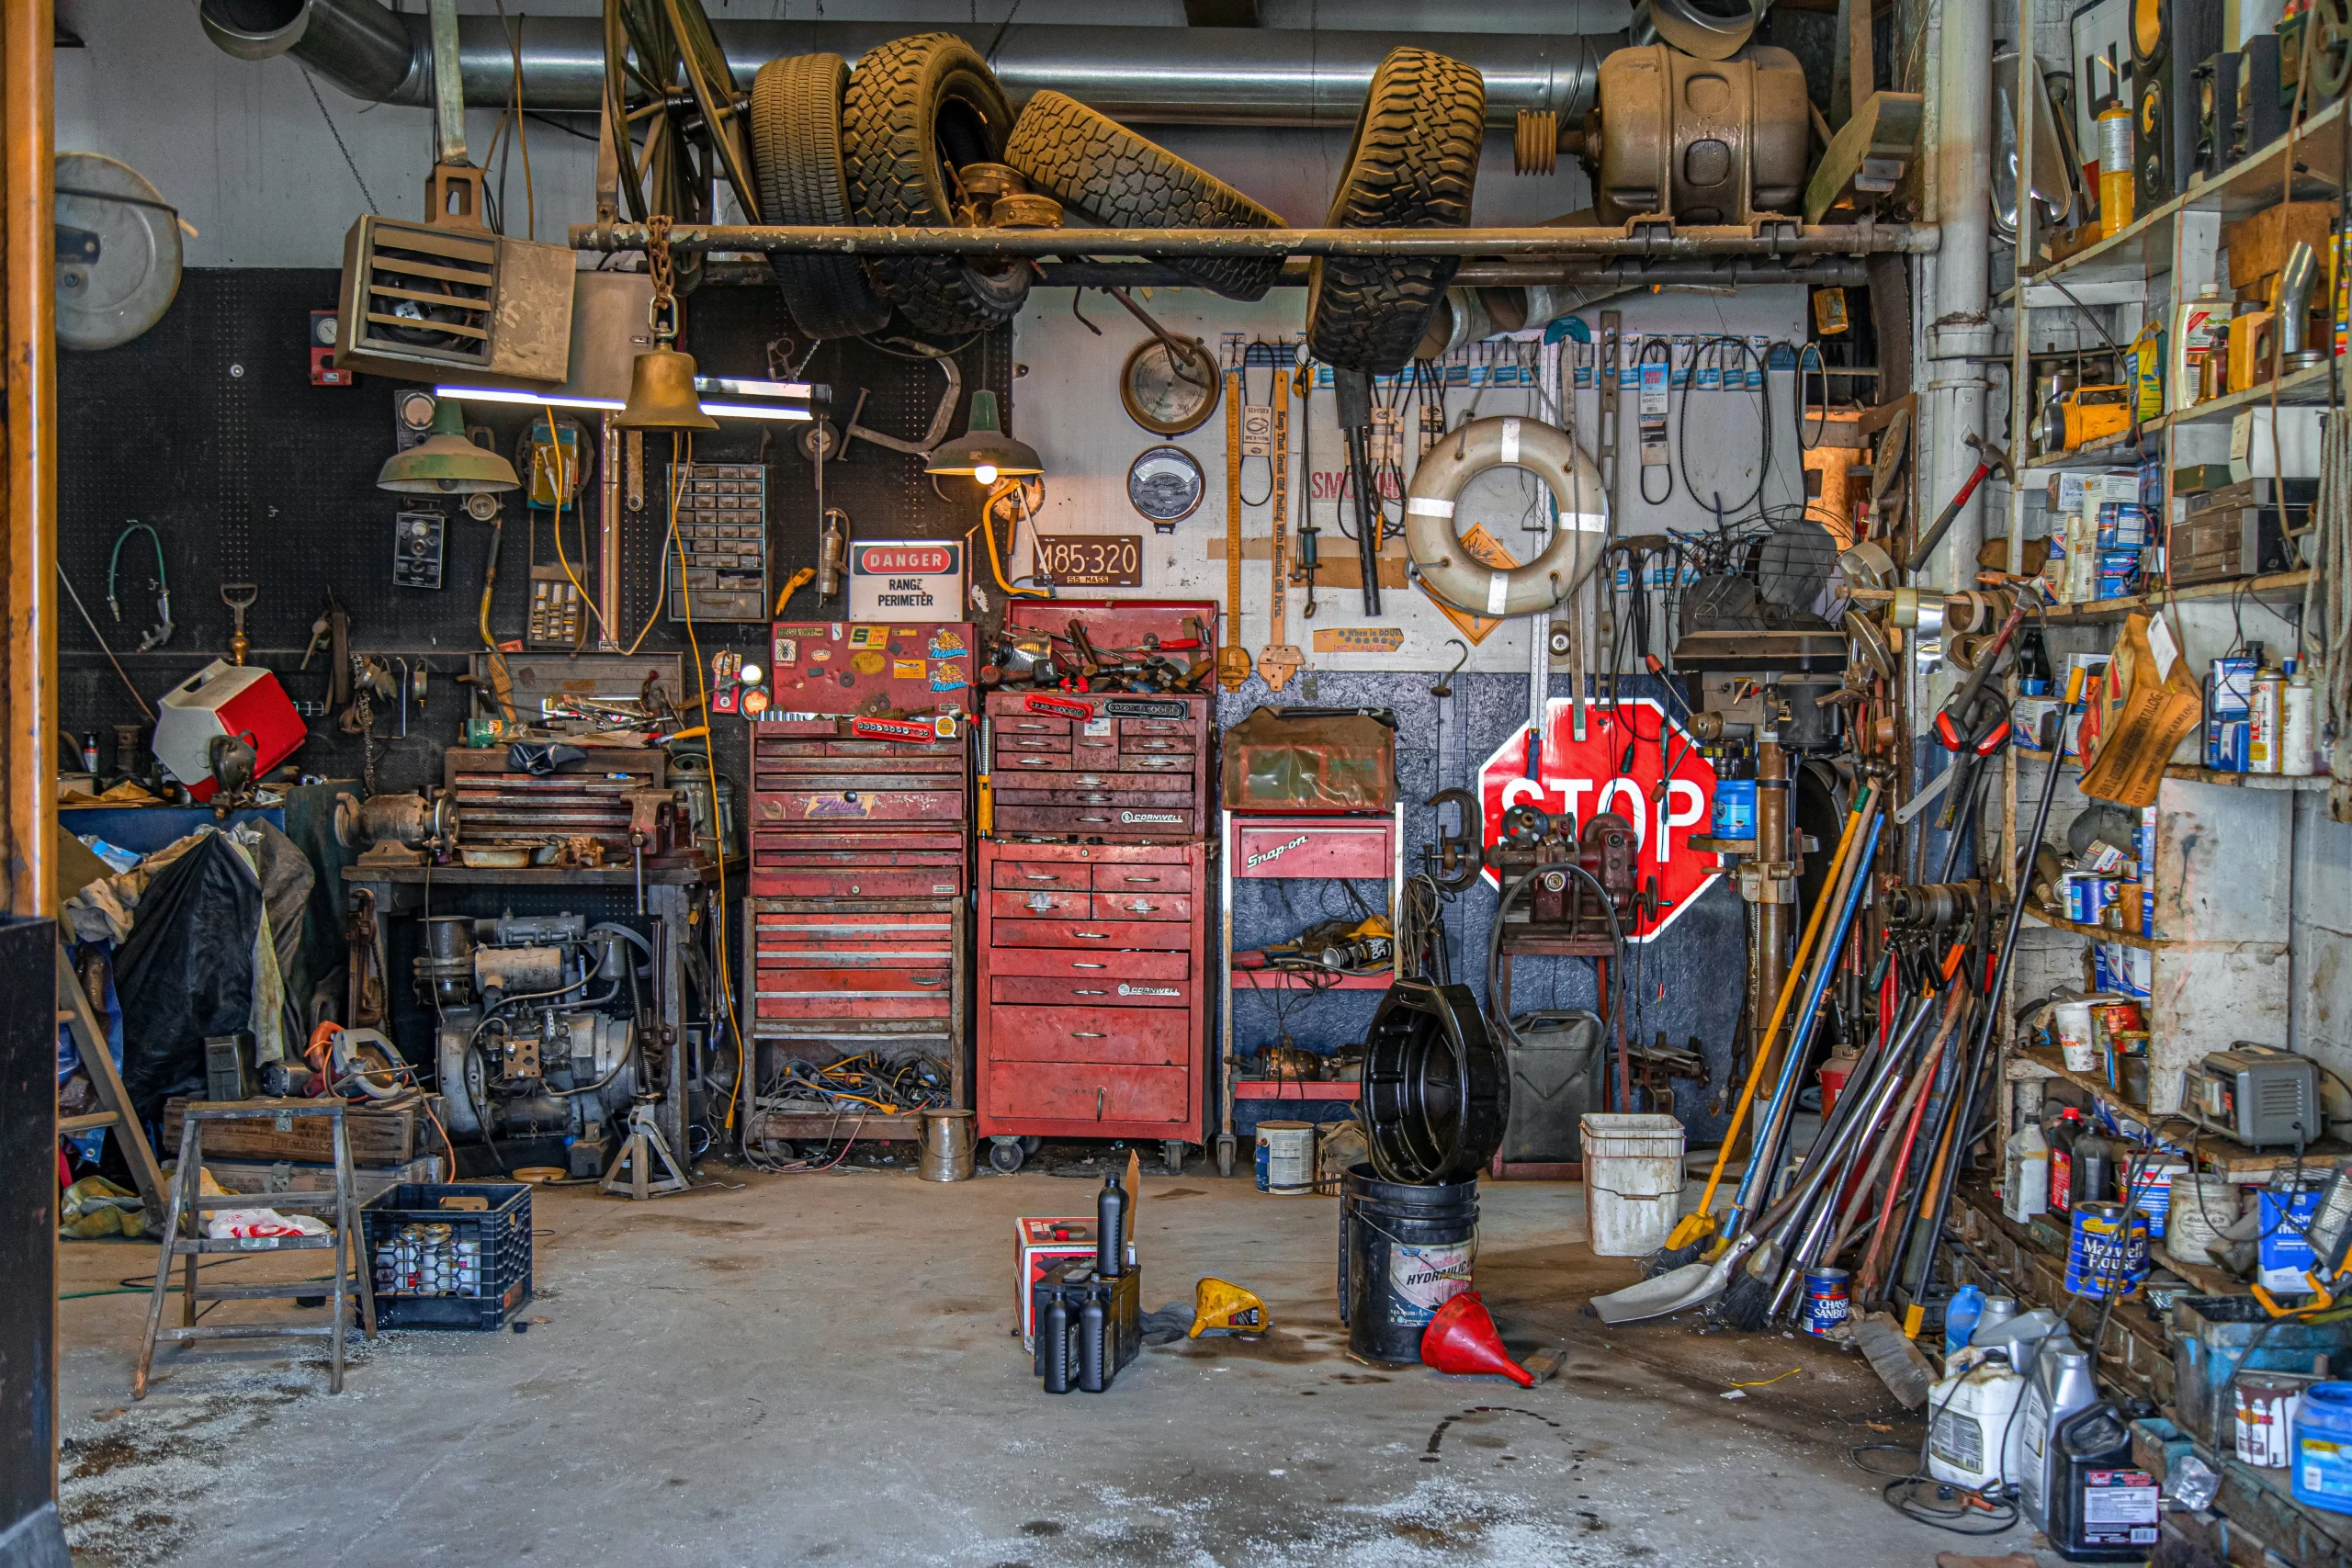 Ultimate Guide: How to Build Garage Storage Shelves and Organize Your Space  - HDR Garage - Garage Storage DFW